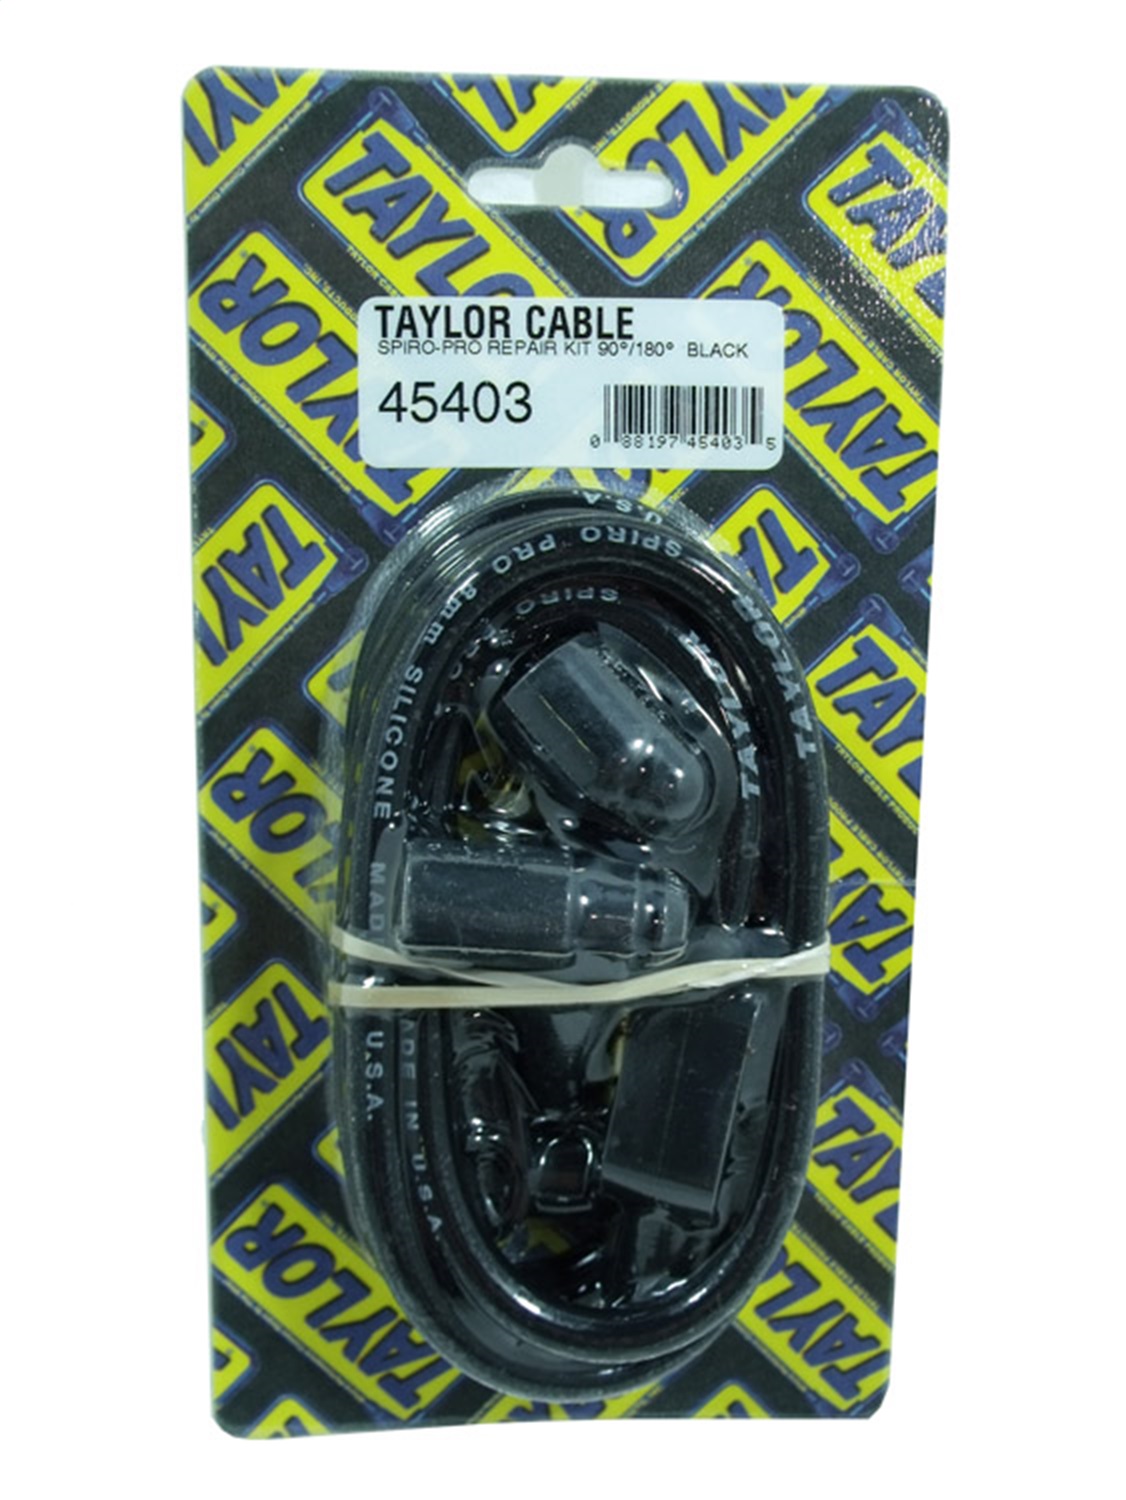 Taylor Cable Taylor Cable 45403 8mm Spiro Pro; Spark Plug Wire Repair Kit